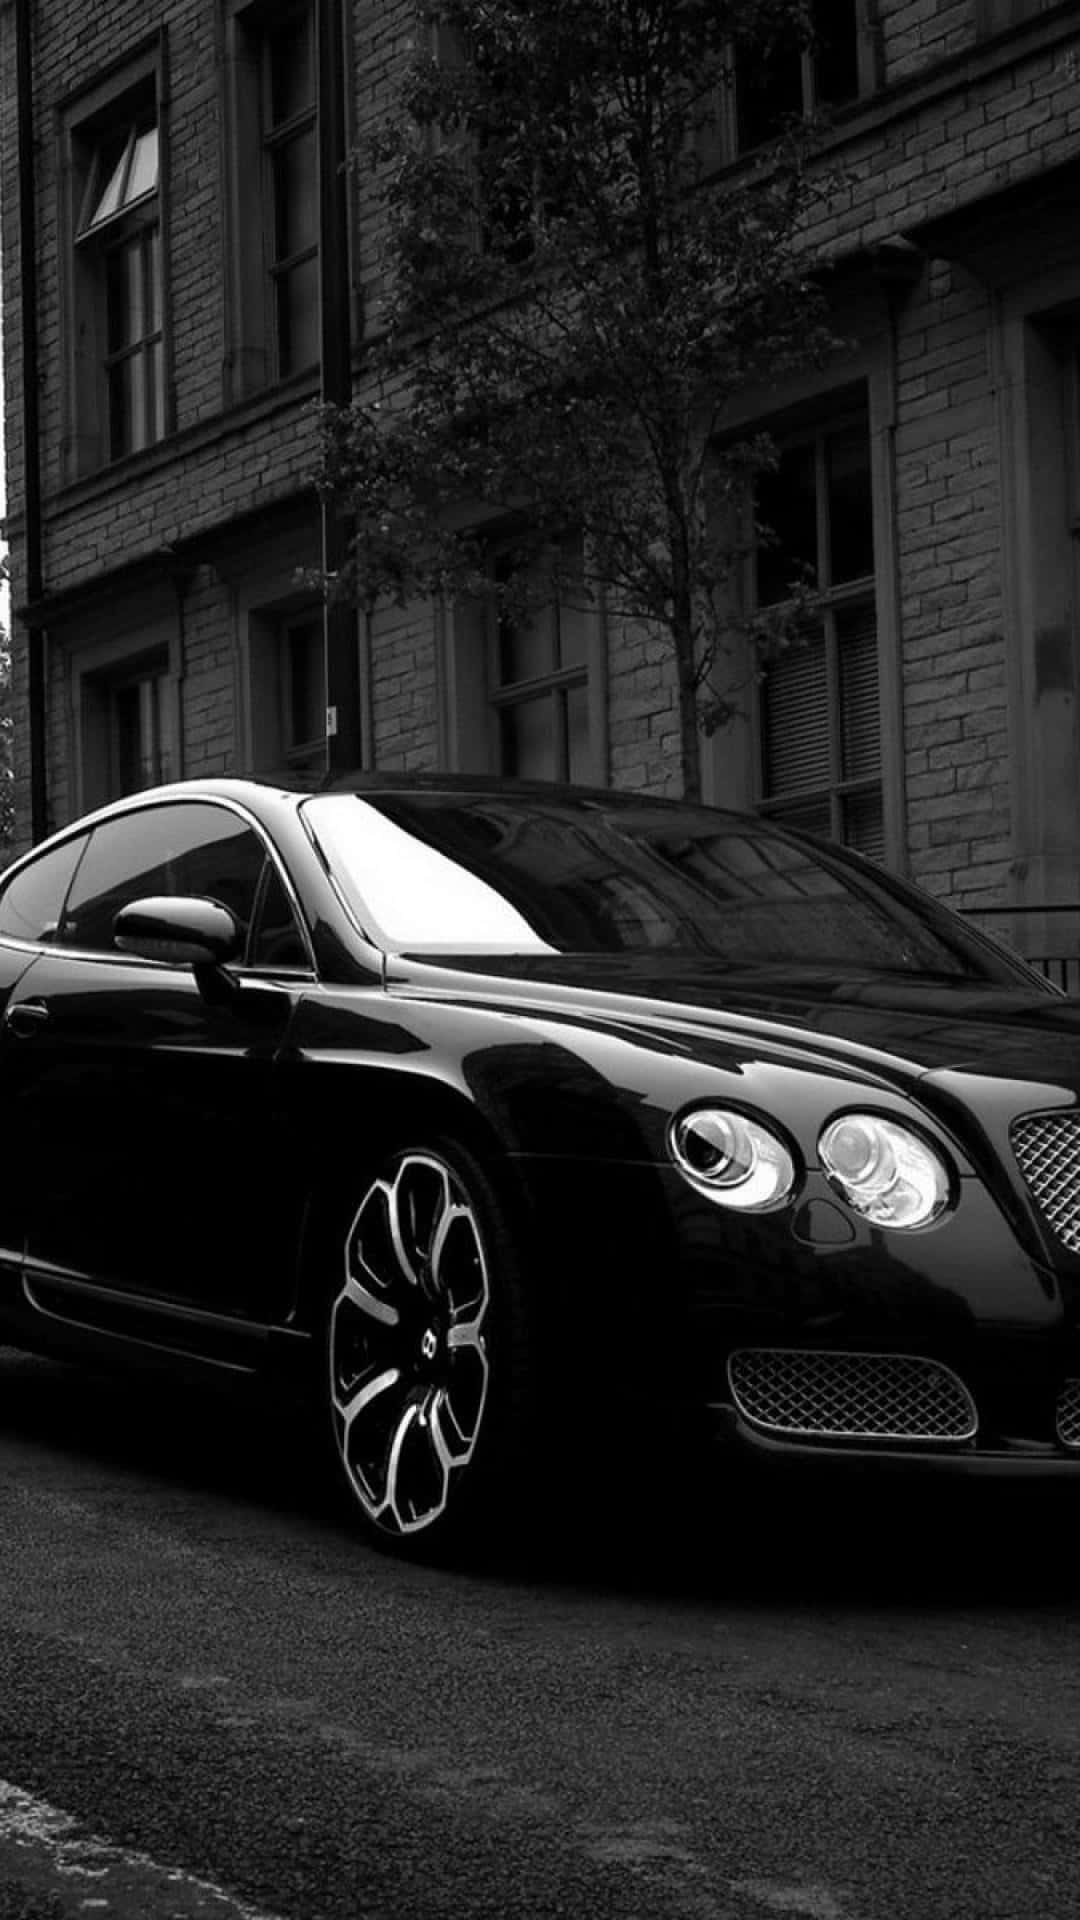 Parked Black Continental Bentley iPhone Wallpaper